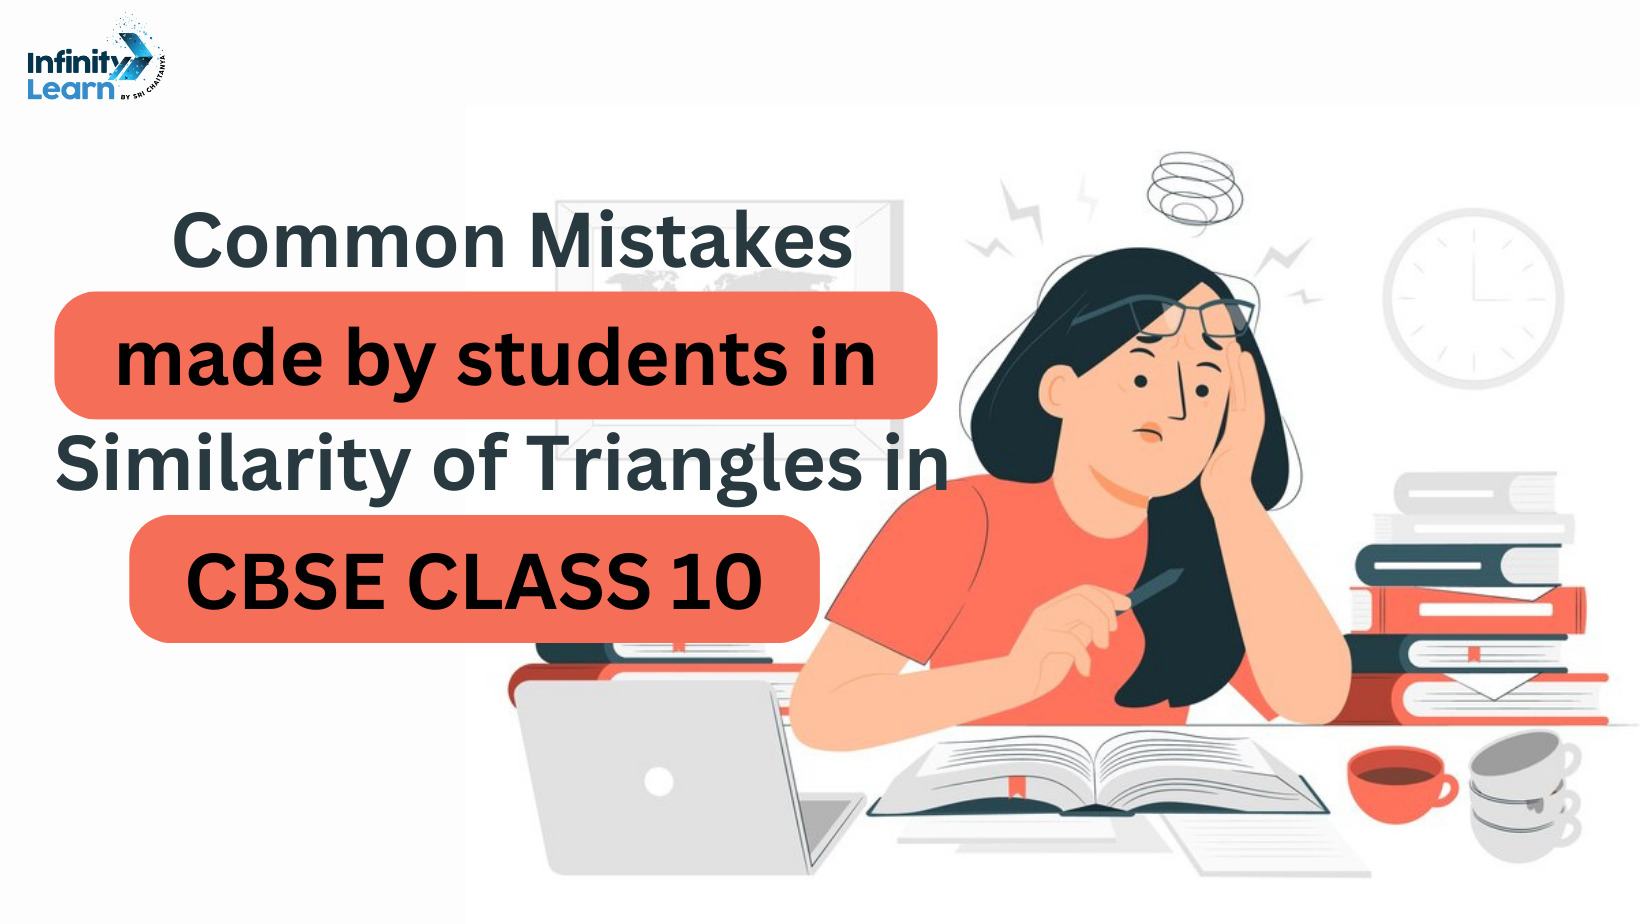 Common mistake made by students in Similarity of Triangles - CBSE Class 10